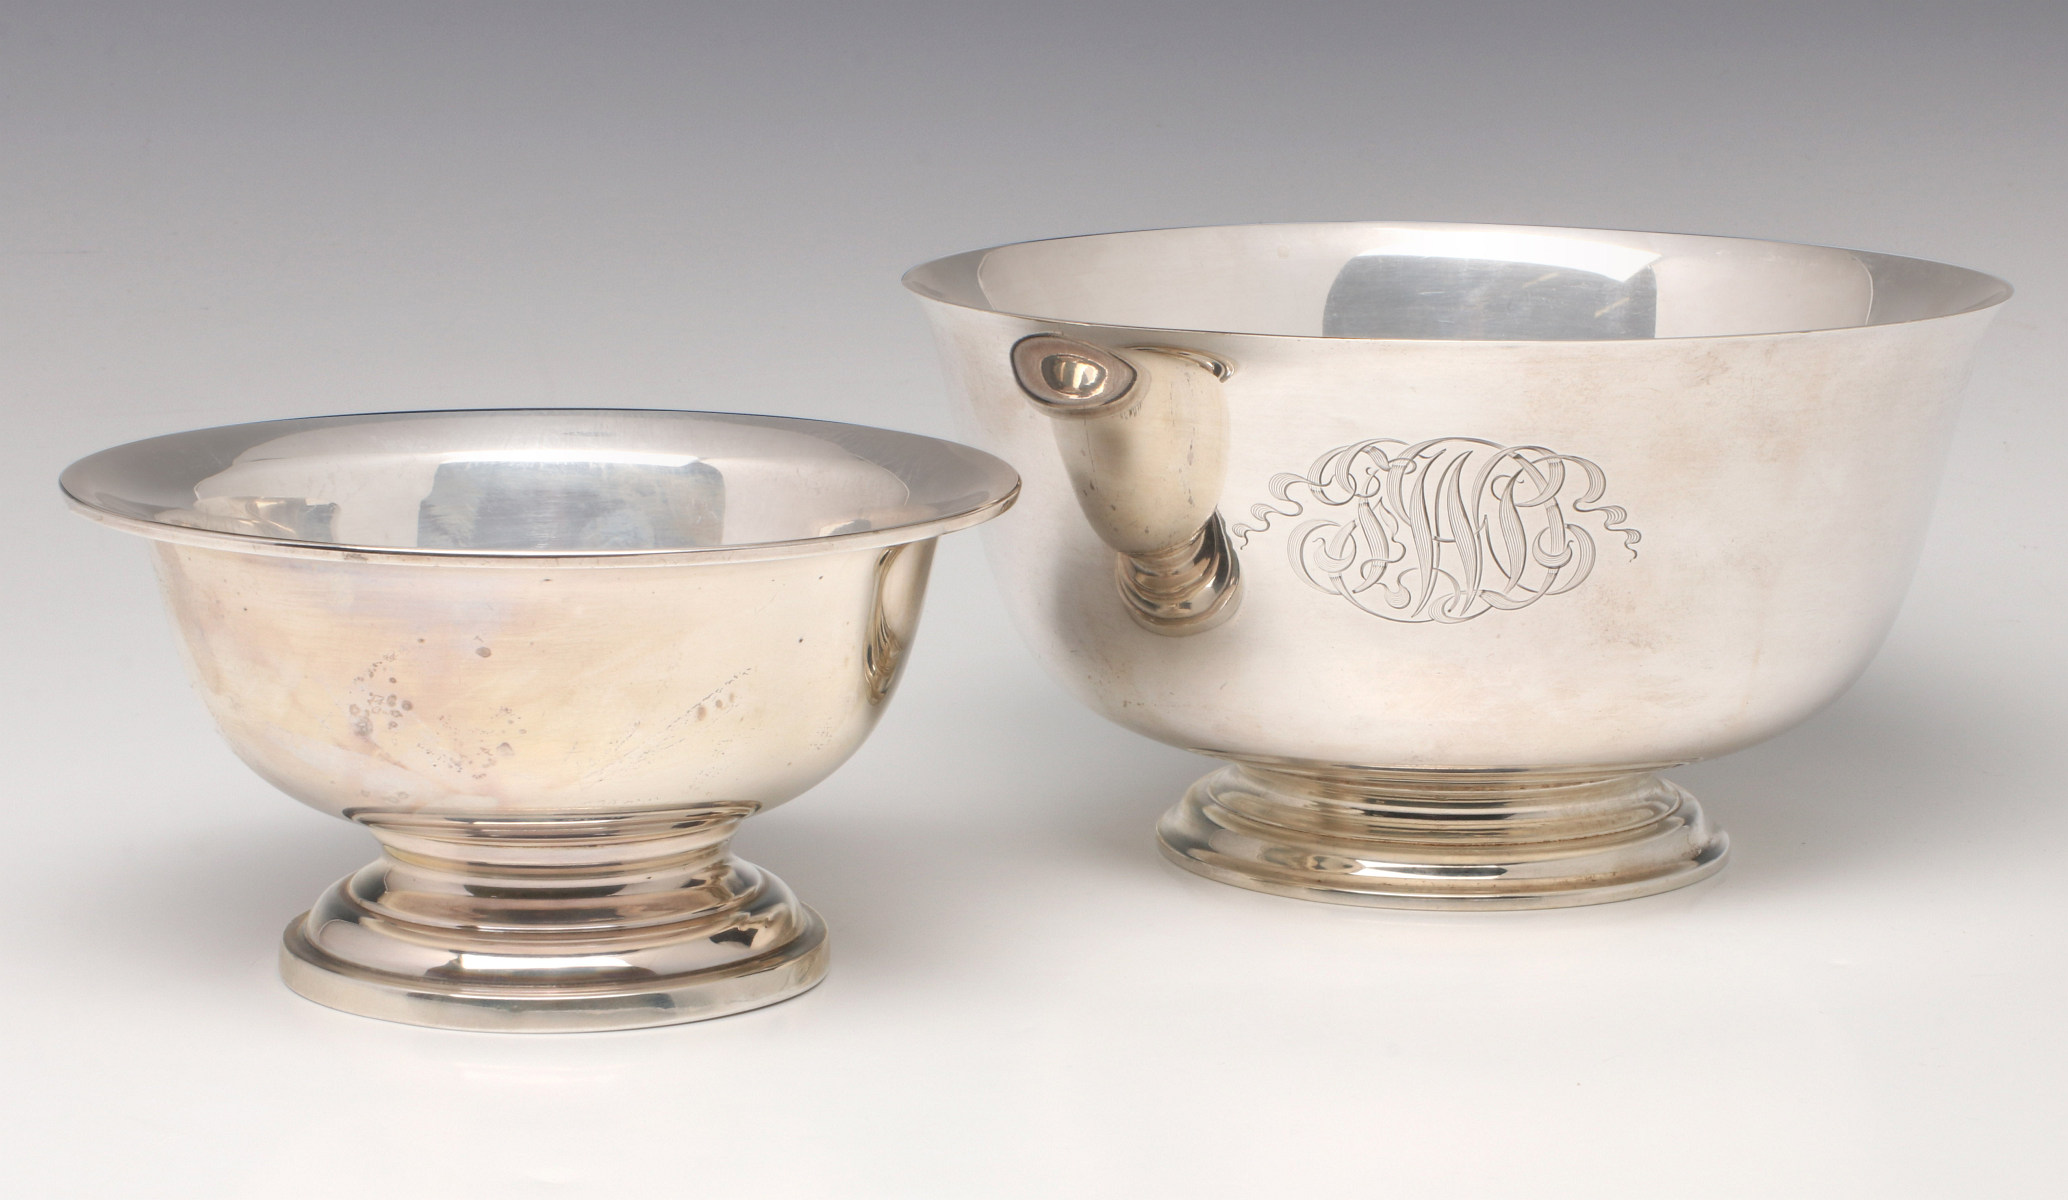 A J.E CALDWELL STERLING SILVER FOOTED BOWL WITH ANOTHER